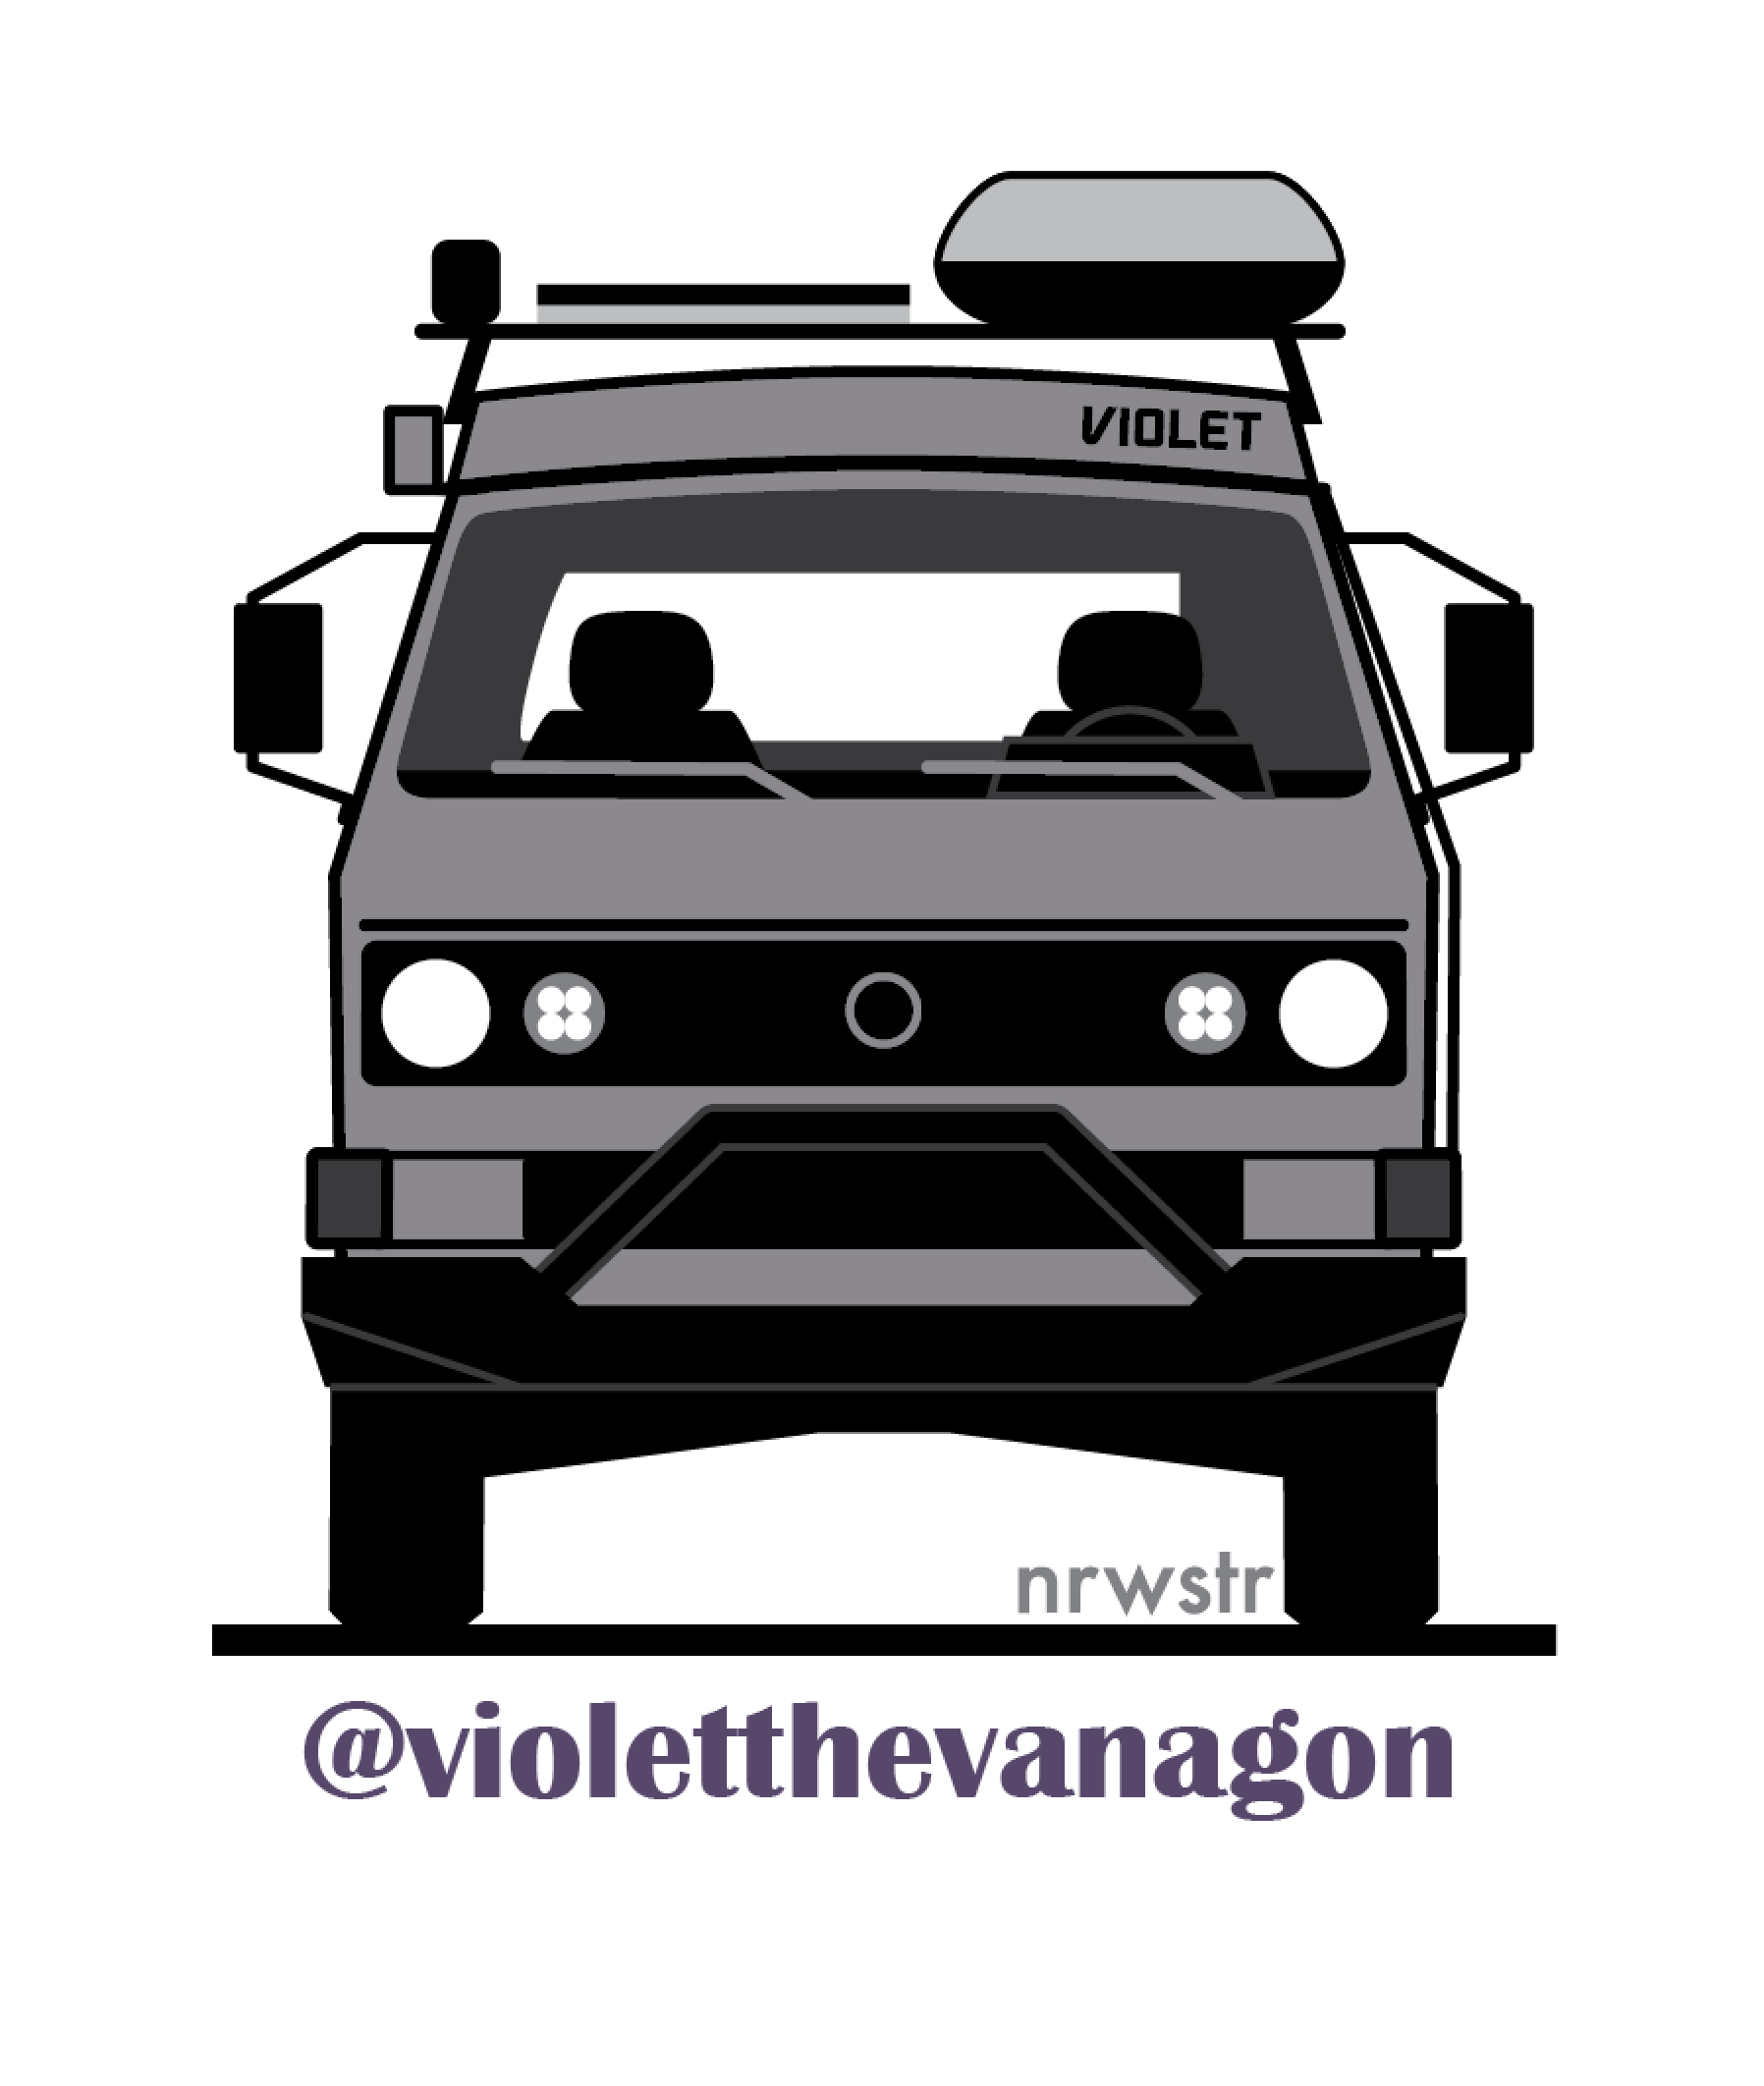 comm-violetthevanagon front view.png